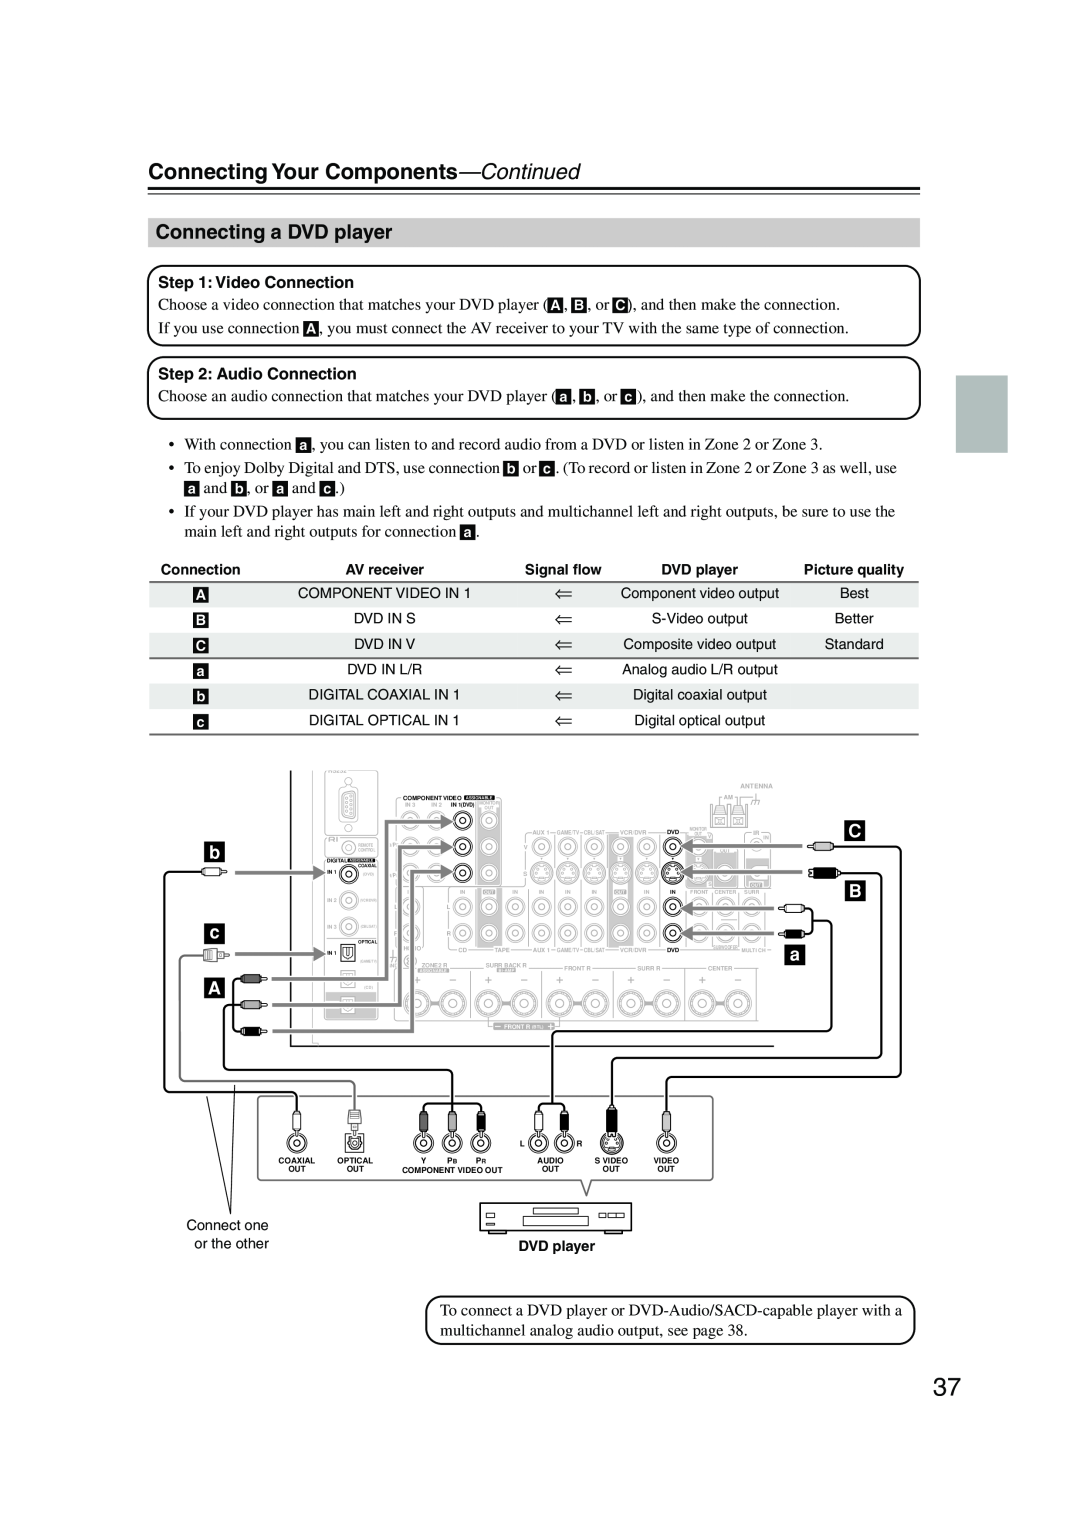 Onkyo TX-NR905 instruction manual Connecting a DVD player, b c A, Connecting Your Components—Continued 